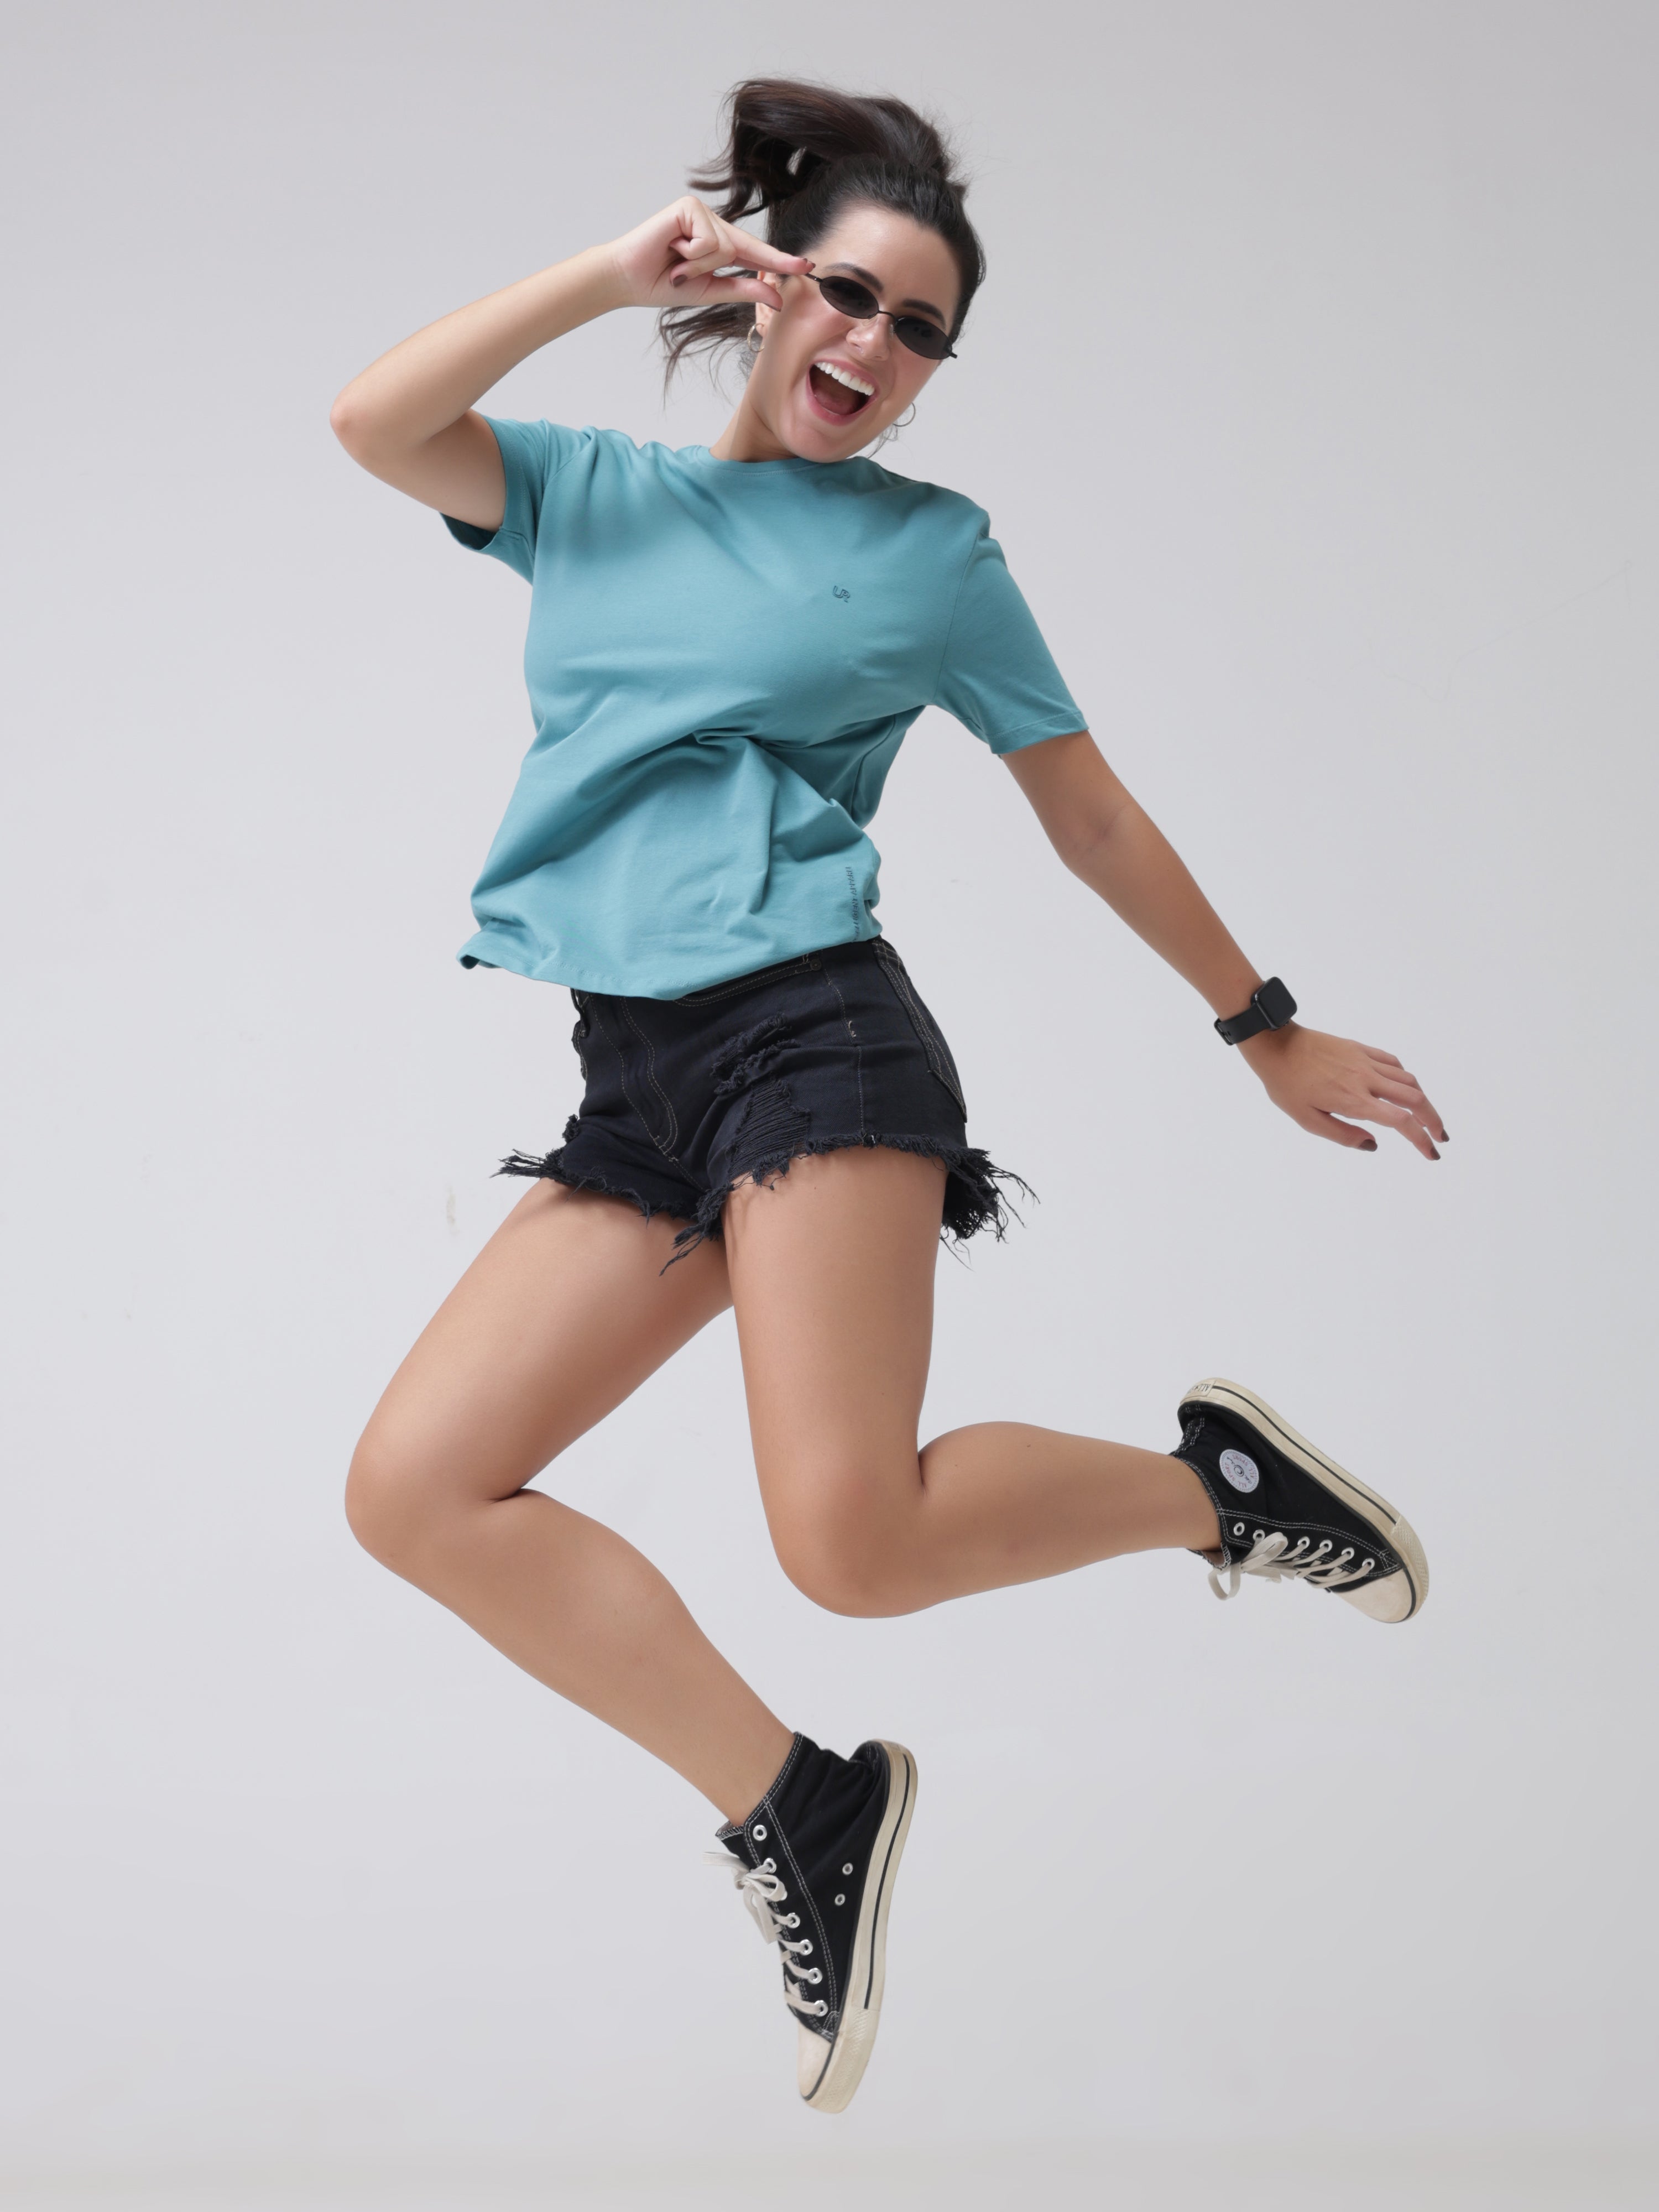 Woman wearing a blue round-neck T-shirt and black shorts, jumping joyfully in stylish casual attire.